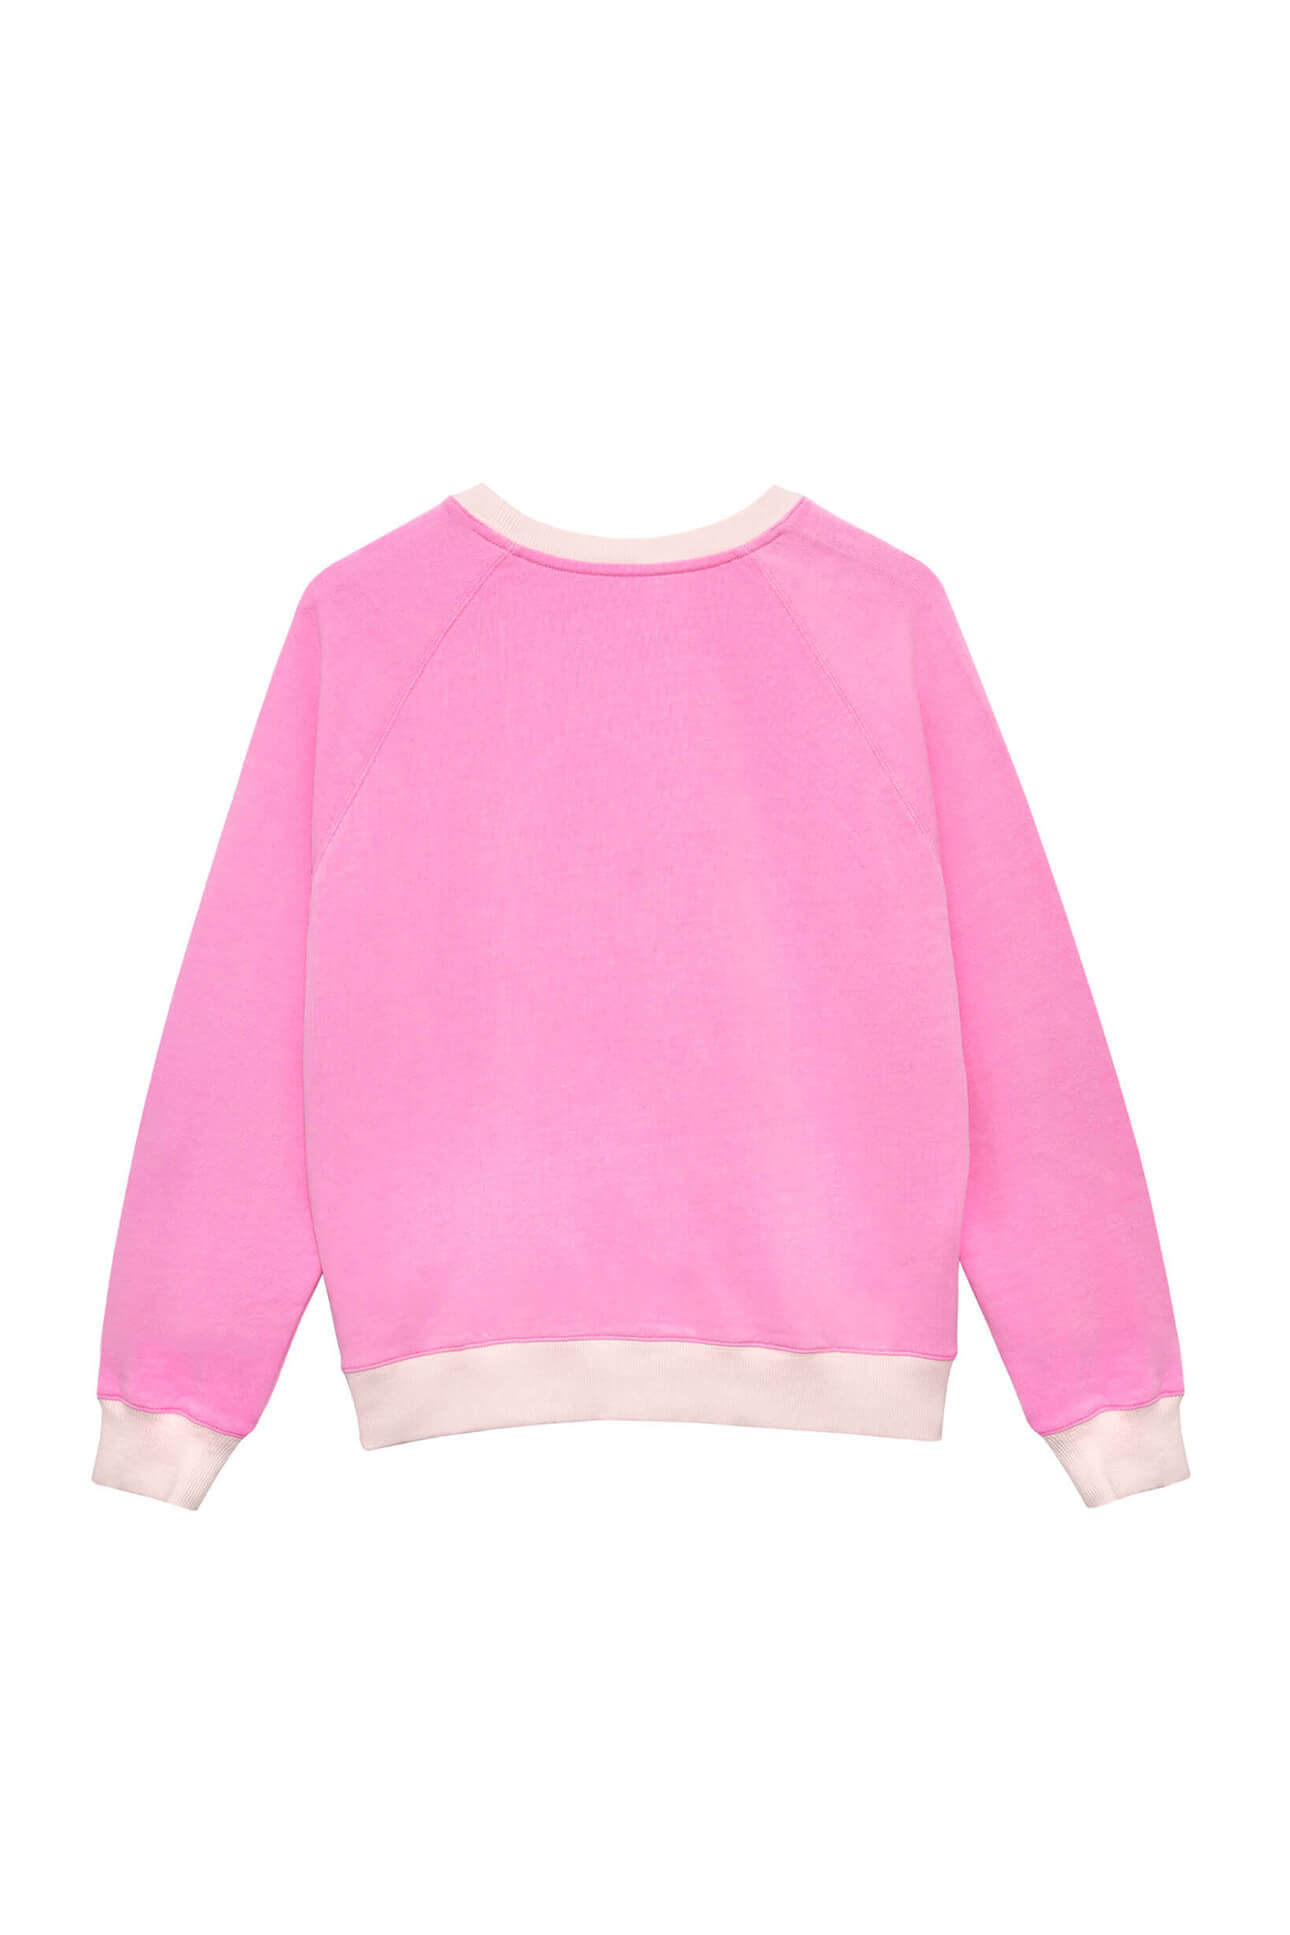 Candy Pink Sweatshirt | Gussy and Lou